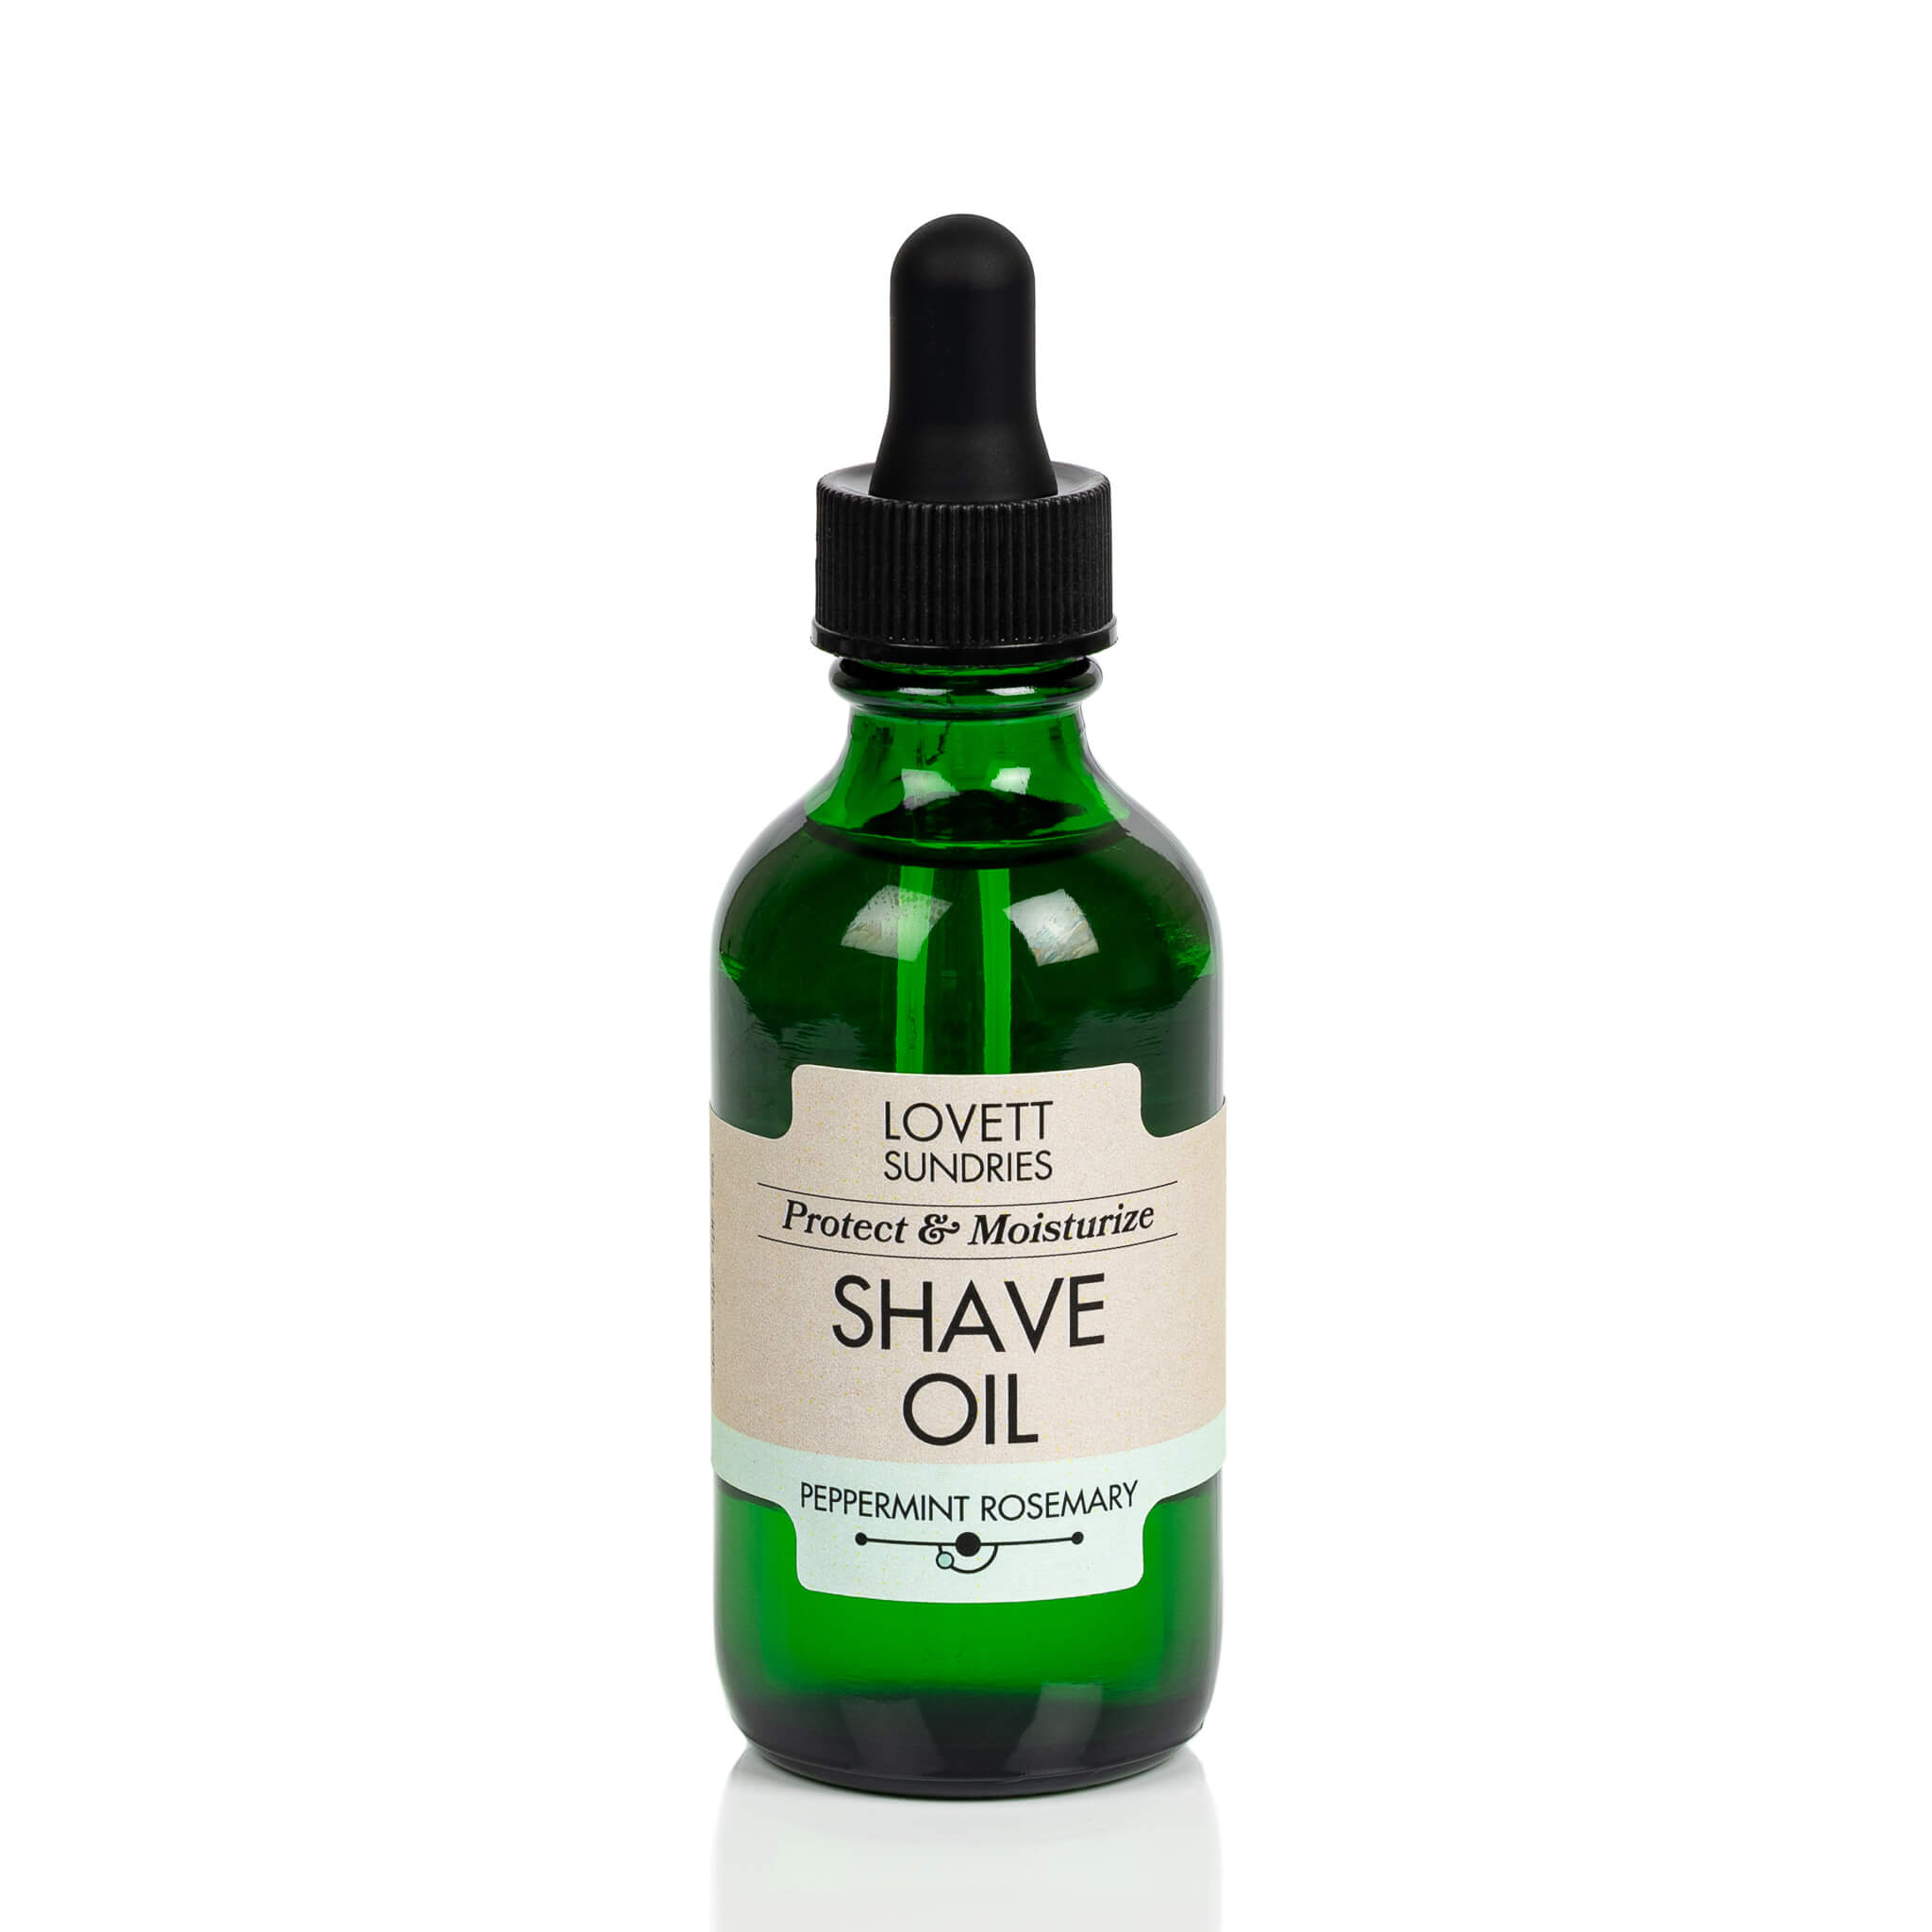 All natural moisturizing and protective peppermint rosemary scented shave oil in a green glass bottle with a dropper. 